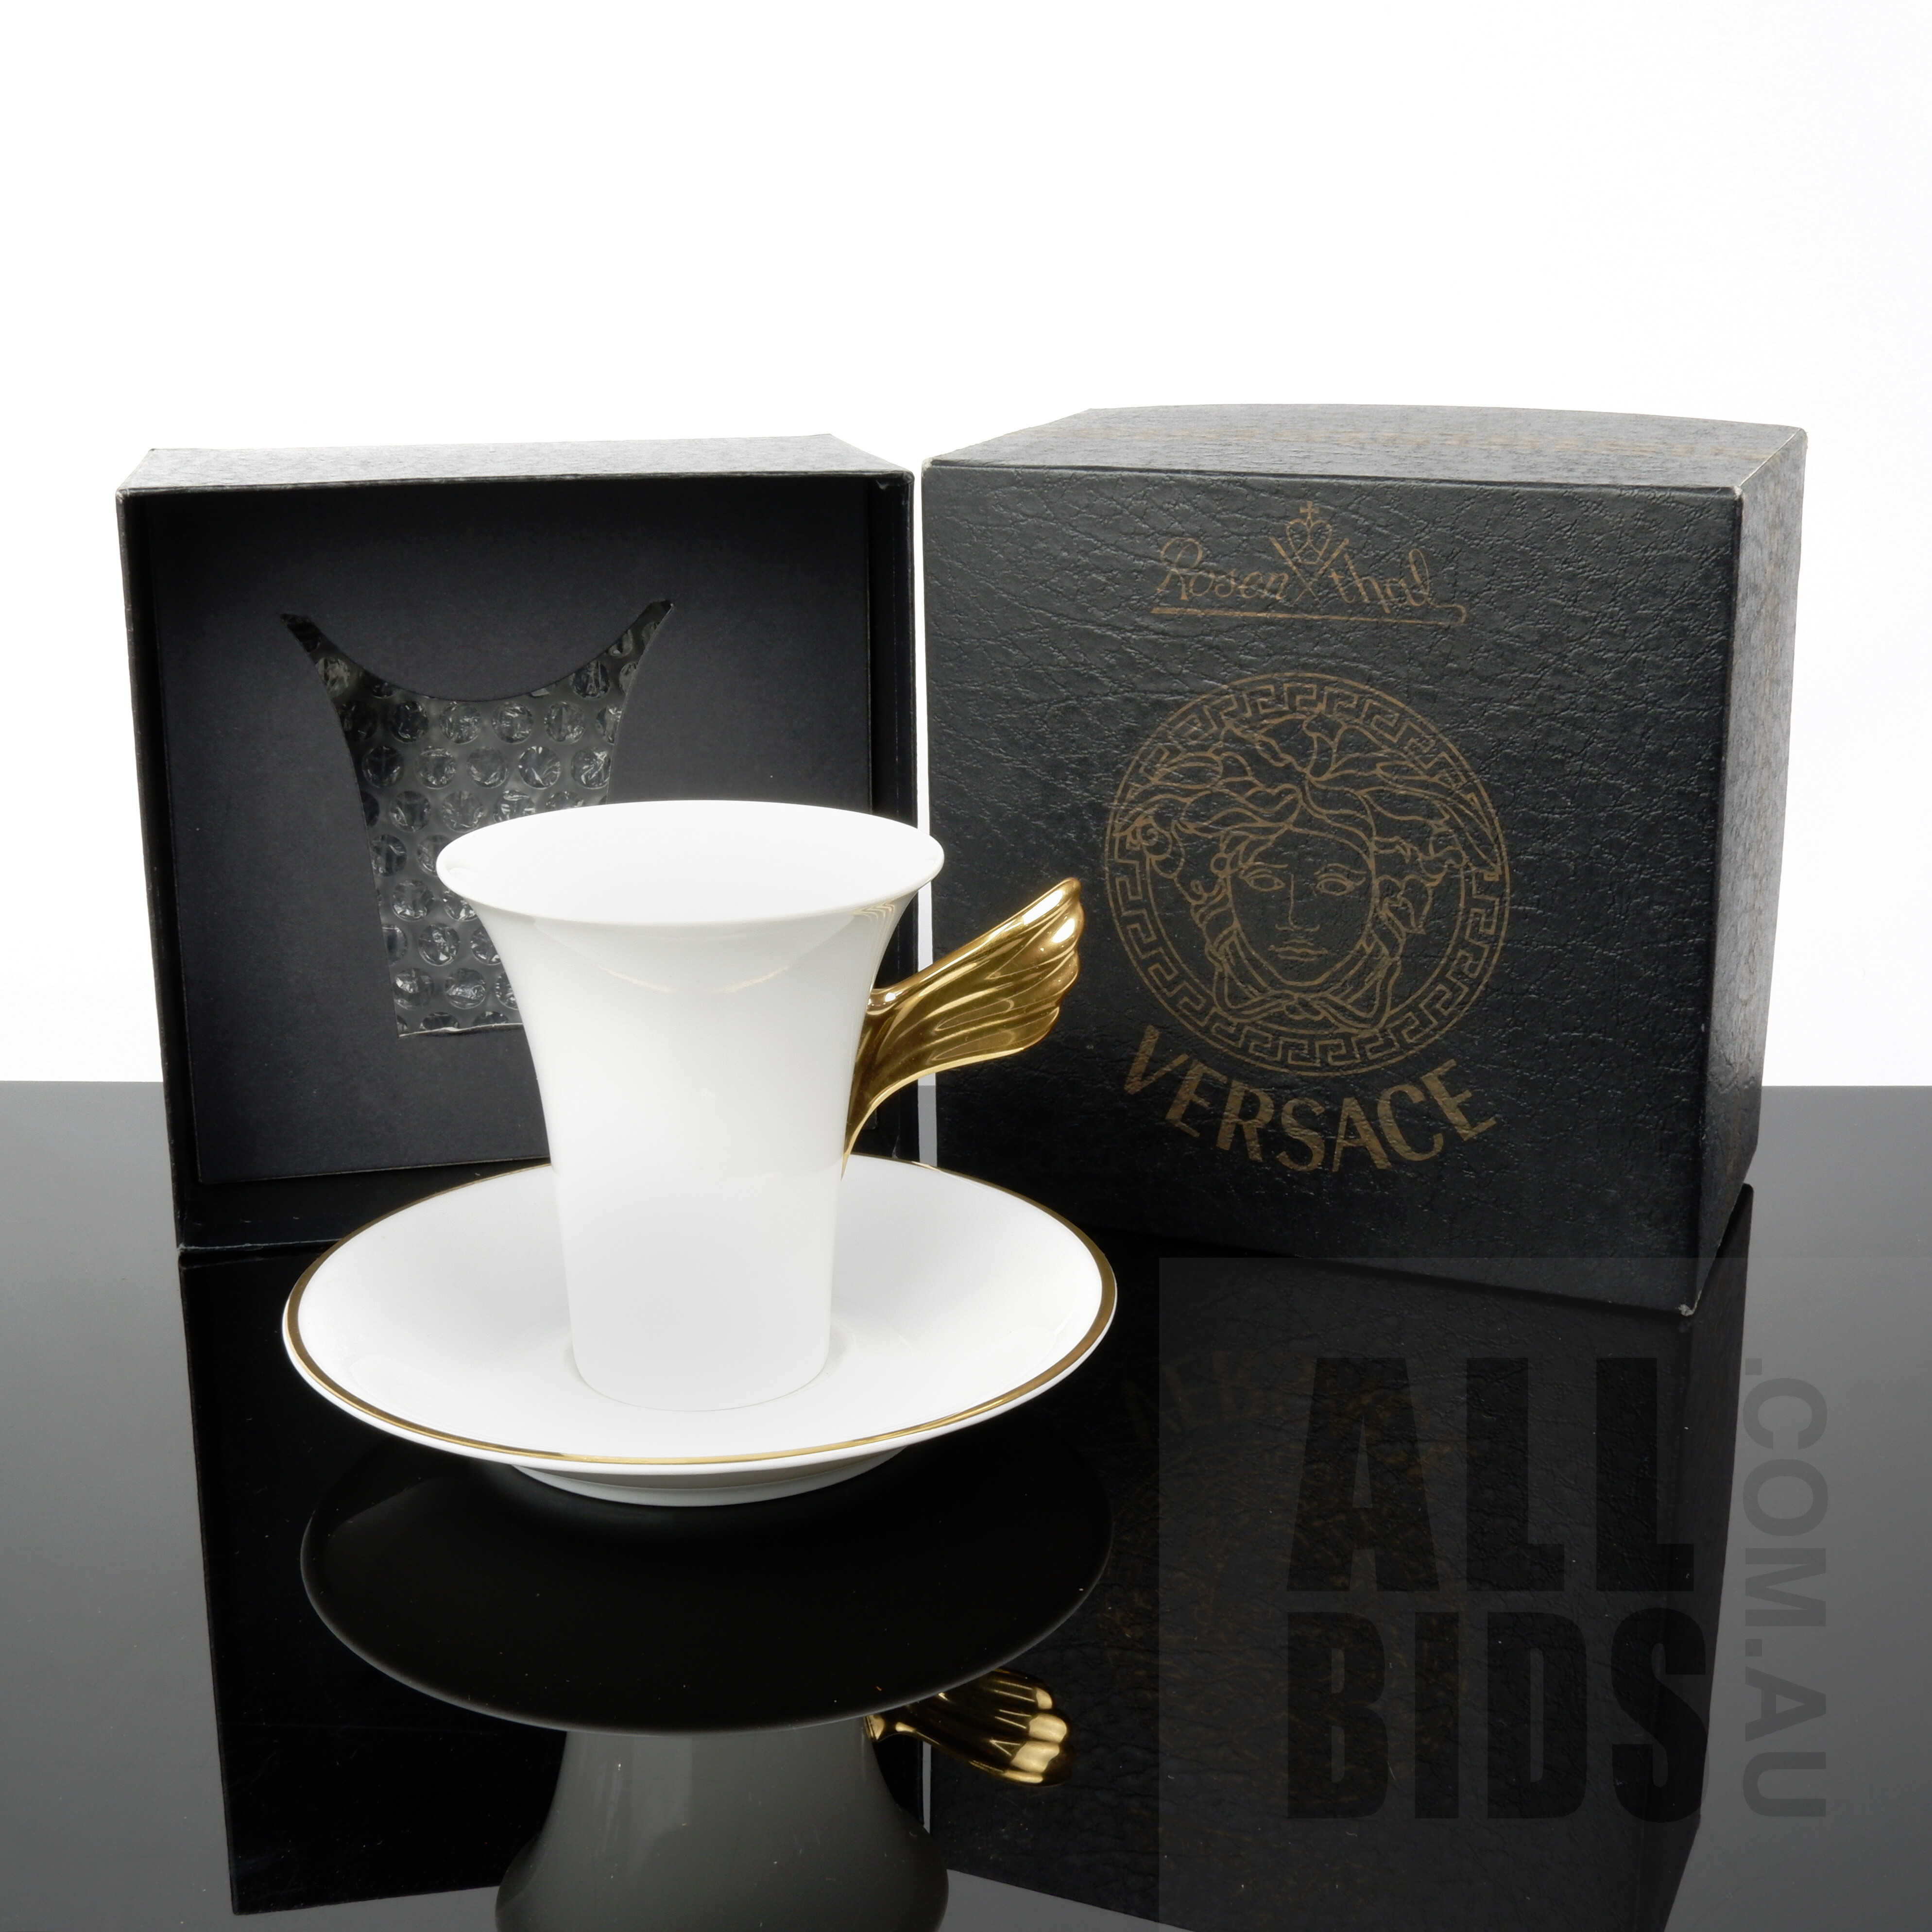 '3rd of 8 Available - One As New Boxed Versace Special Edition Nescafe Gold Gilt Porcelain Coffee Cup and Saucer Manufactured by Rosenthal Studio-Line'